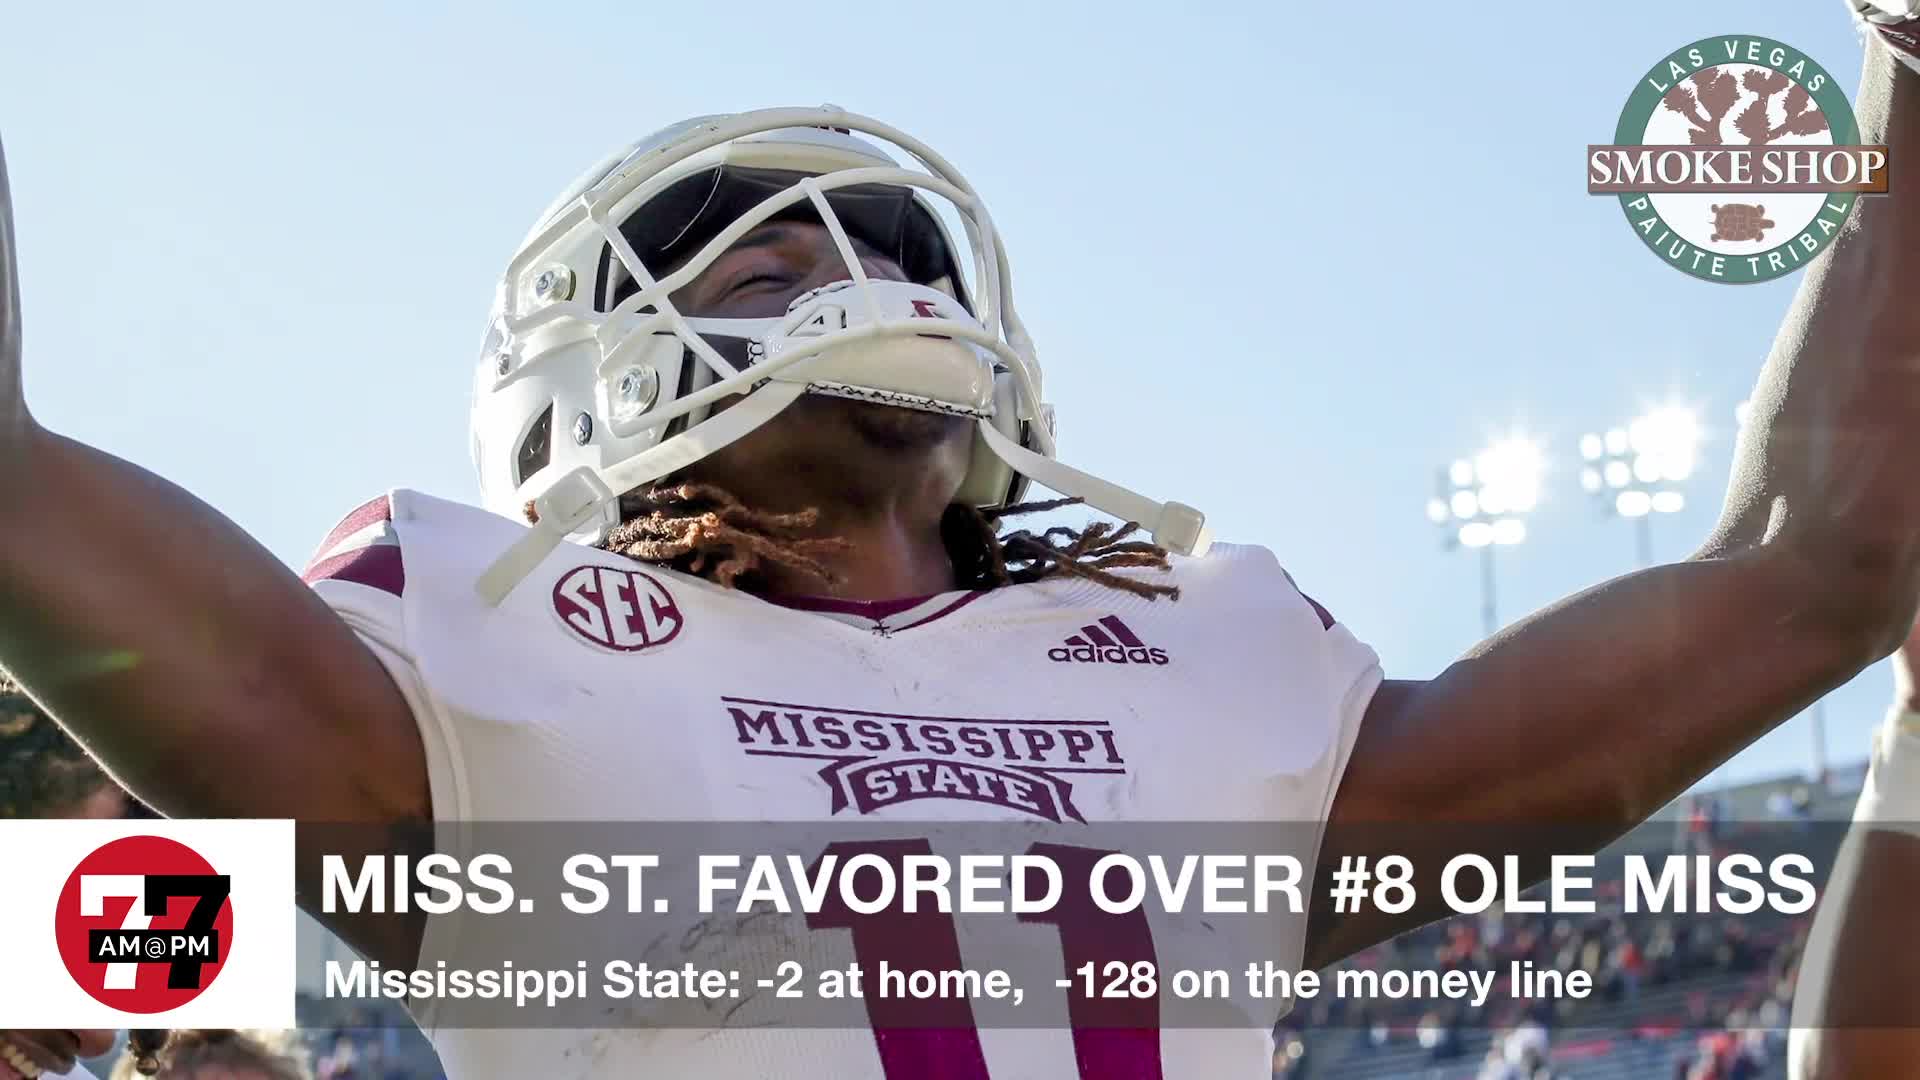 7@7PM Miss. St. Favored Over #8 Ole Miss